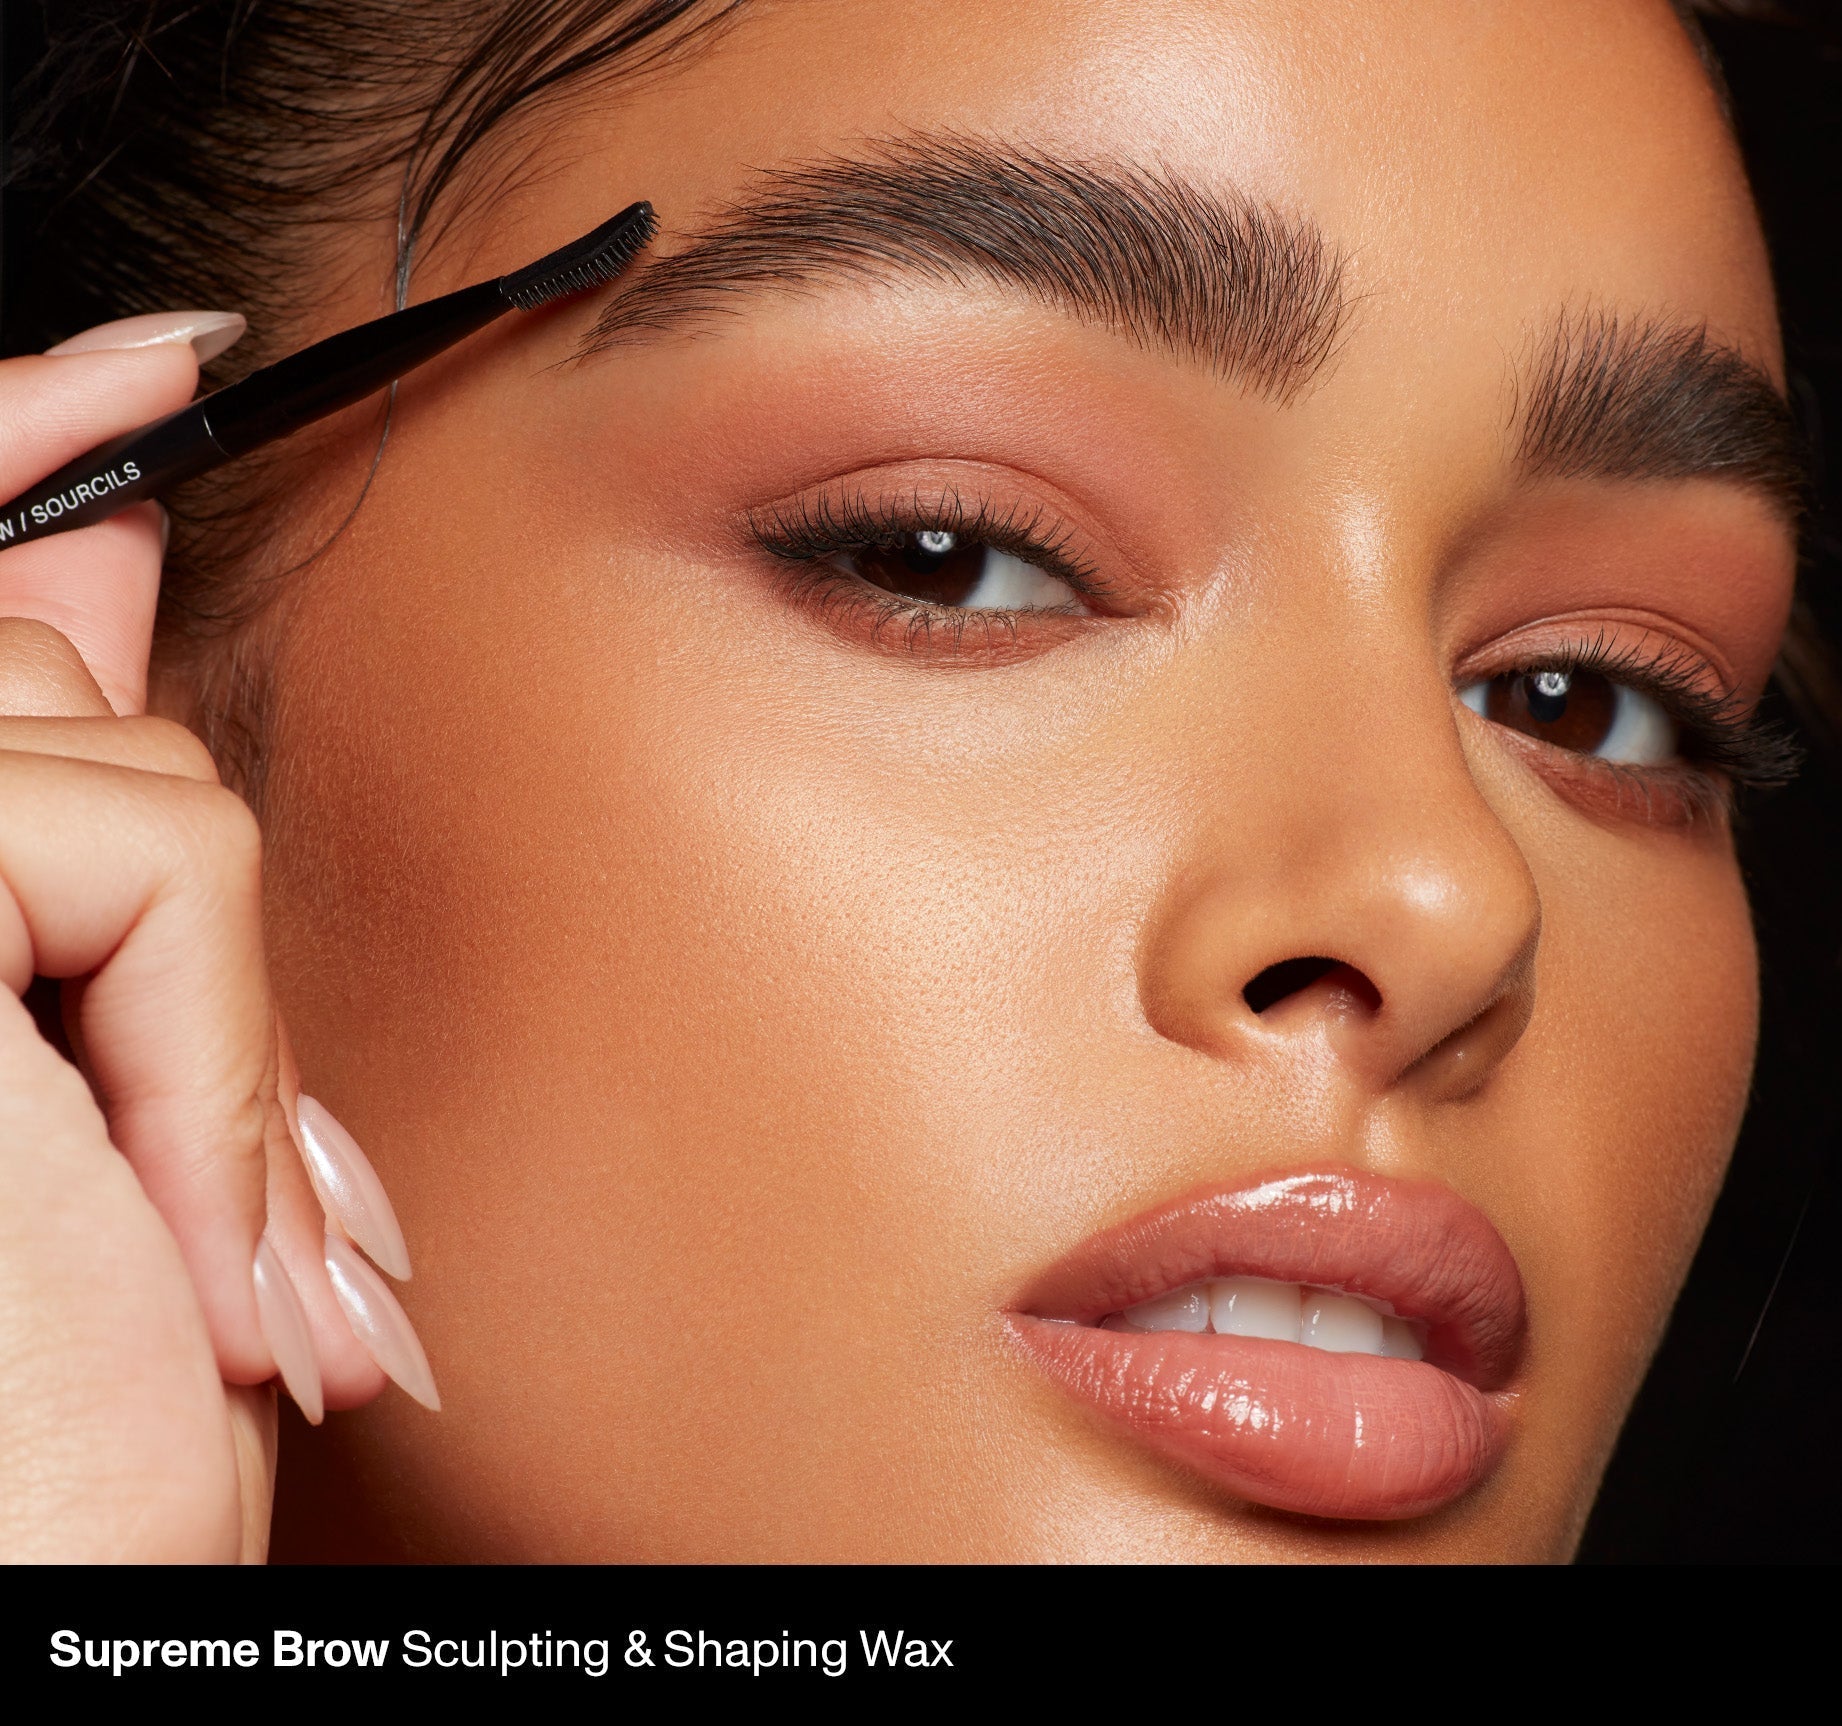 Supreme Brow Sculpting And Shaping Wax - Chocolate Mousse - Image 9